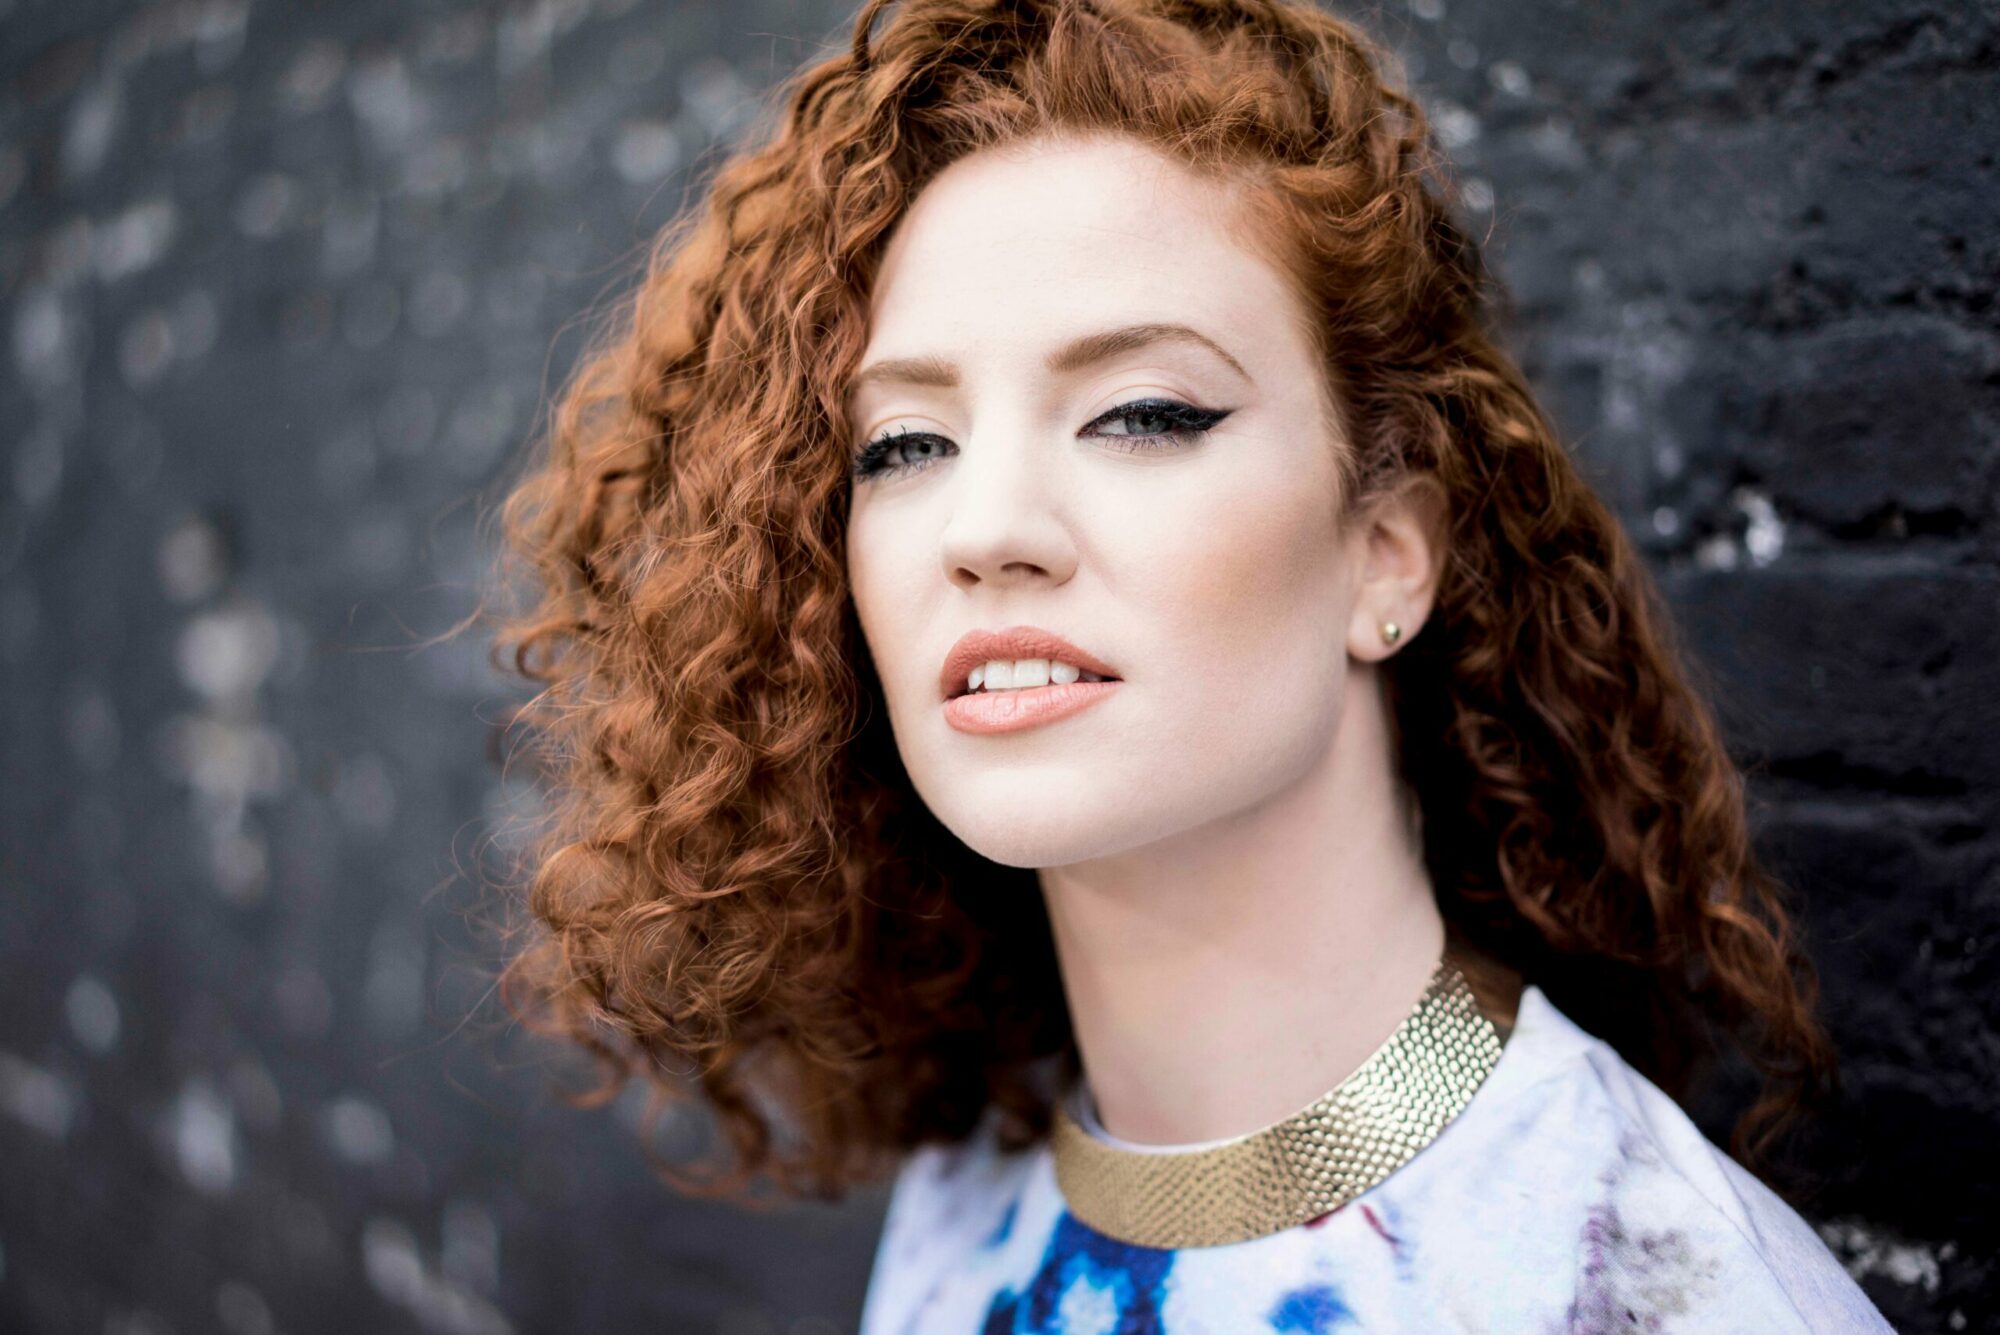 Image name Jess Glynne Official Ticket and Hotel Packages at Scarborough Open Air Theatre Scarborough scaled the 1 image from the post Jess Glynne- Official Ticket and Hotel Packages at The Piece Hall, Halifax in Yorkshire.com.